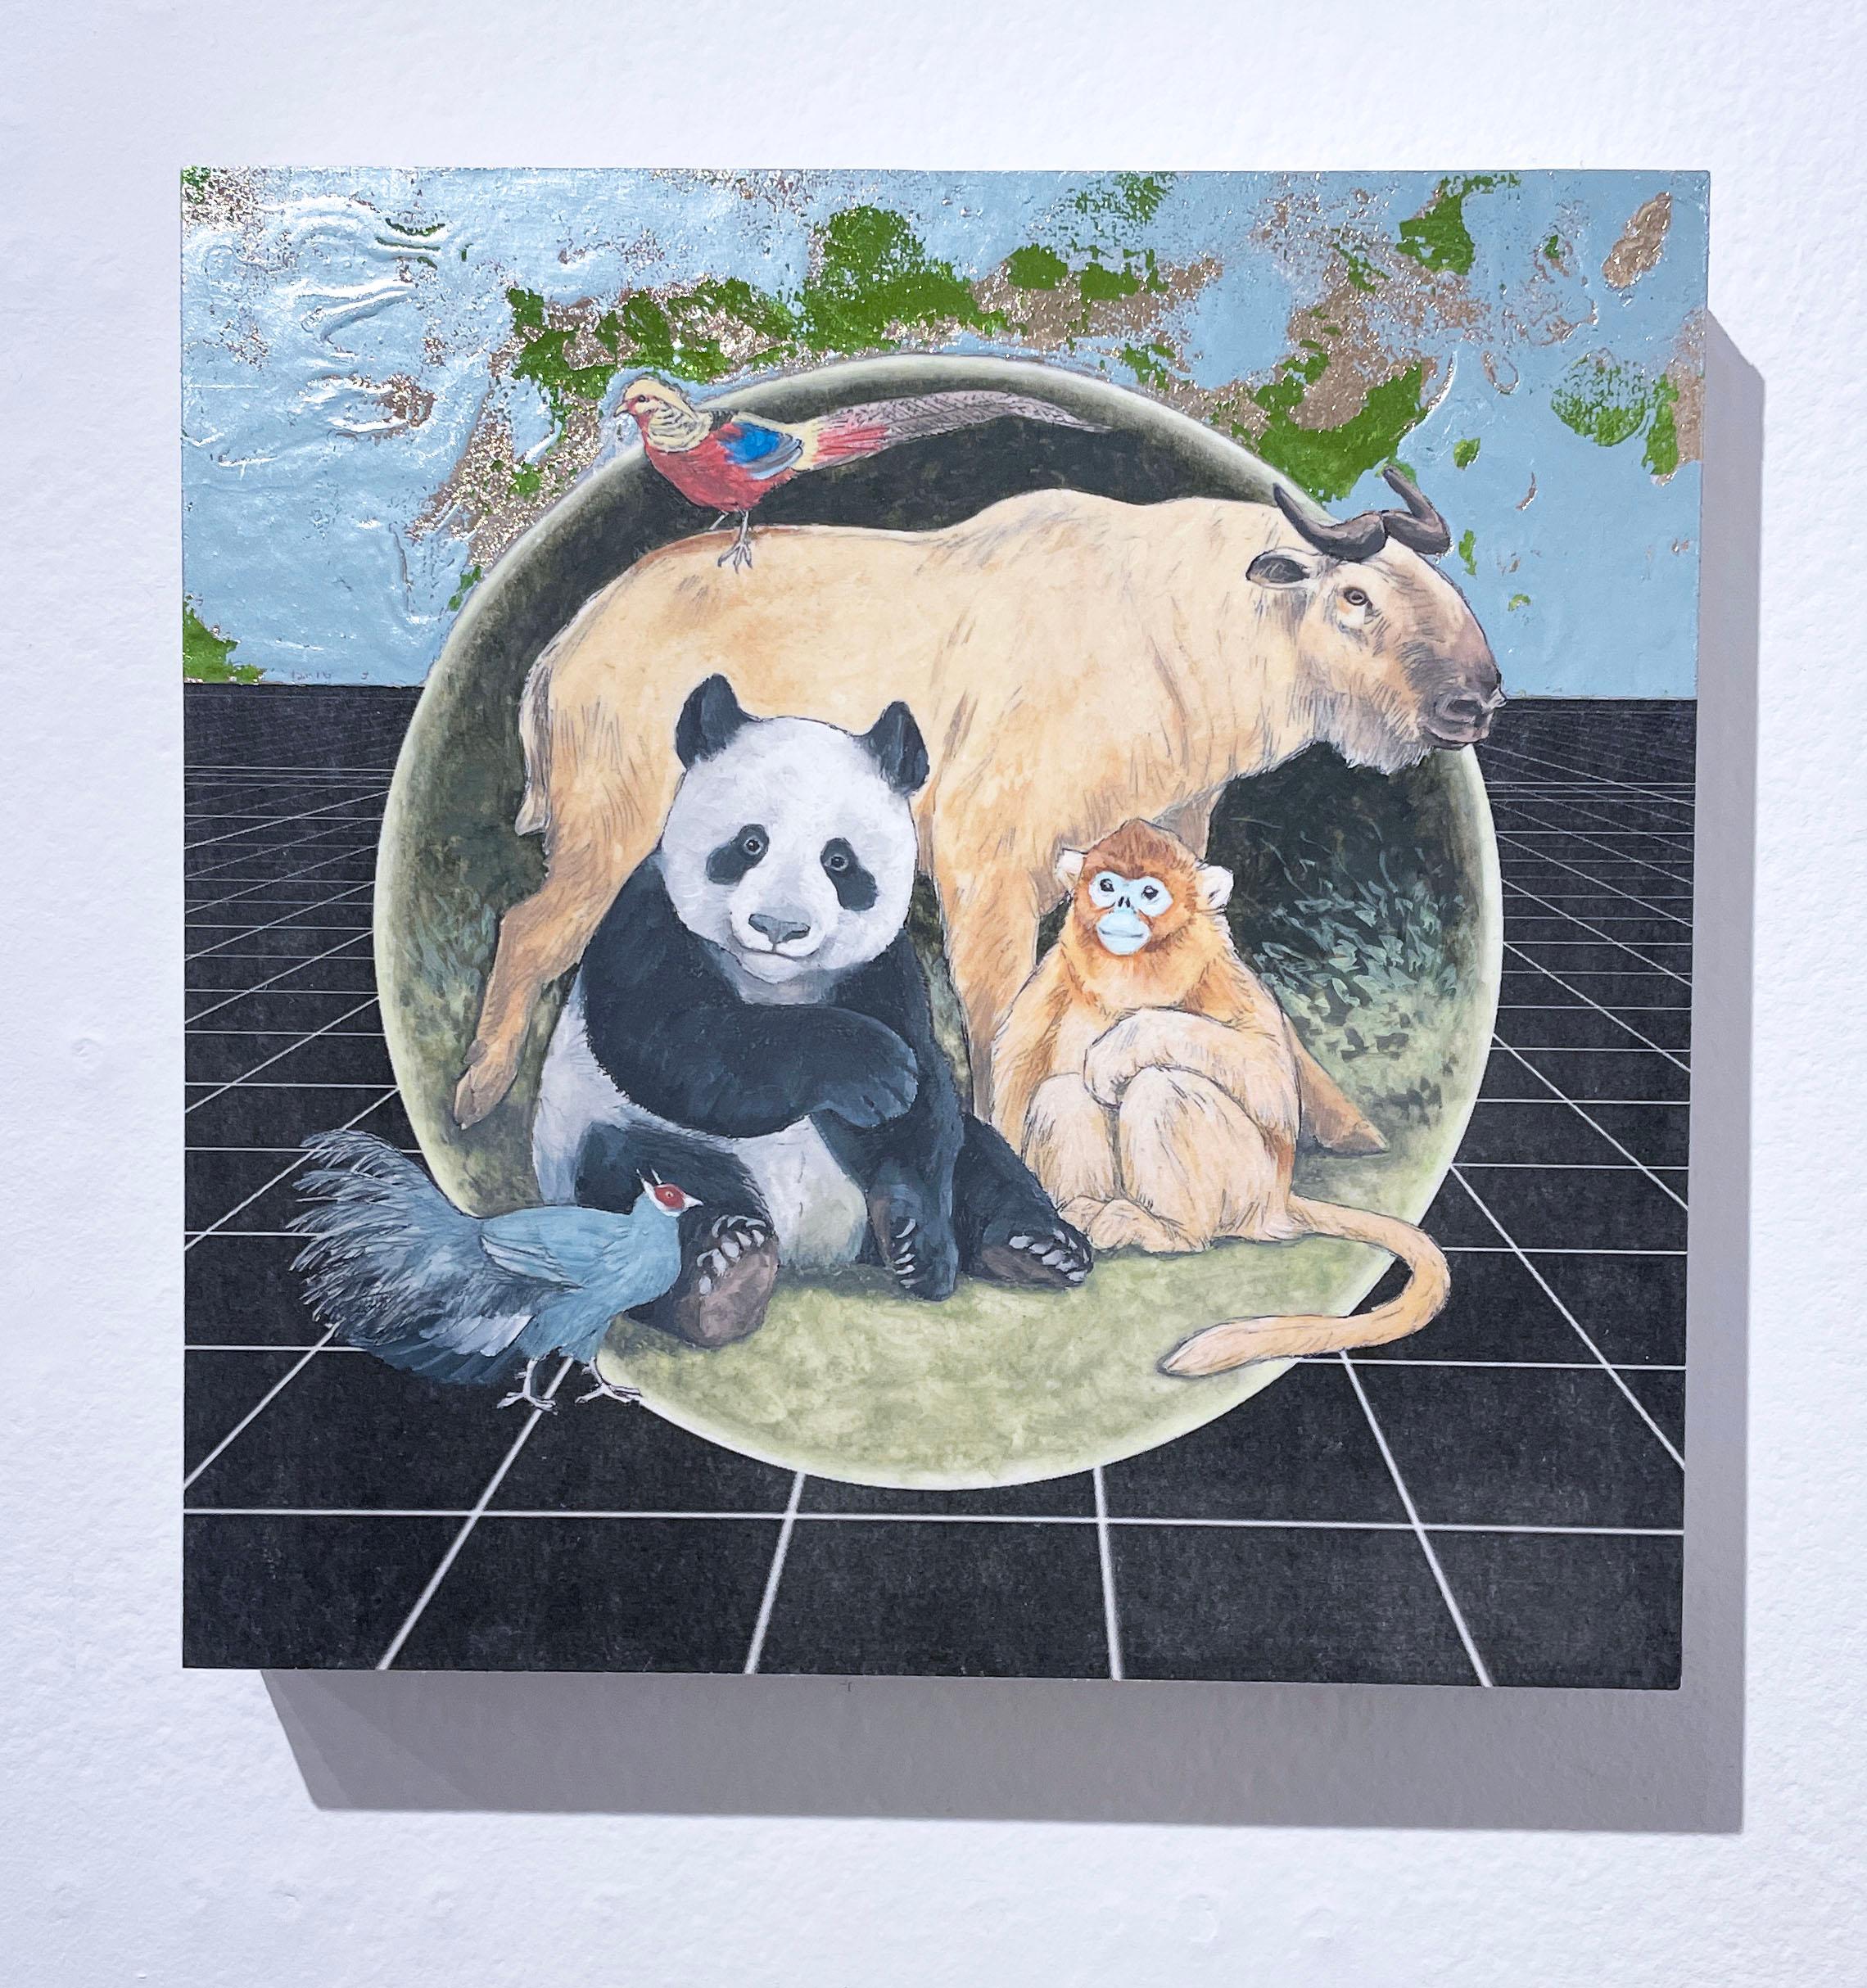 Sichuan Forest (2019), oil painting, ecosystem, animals, panda, monkey, fauna - Painting by Alexis Kandra